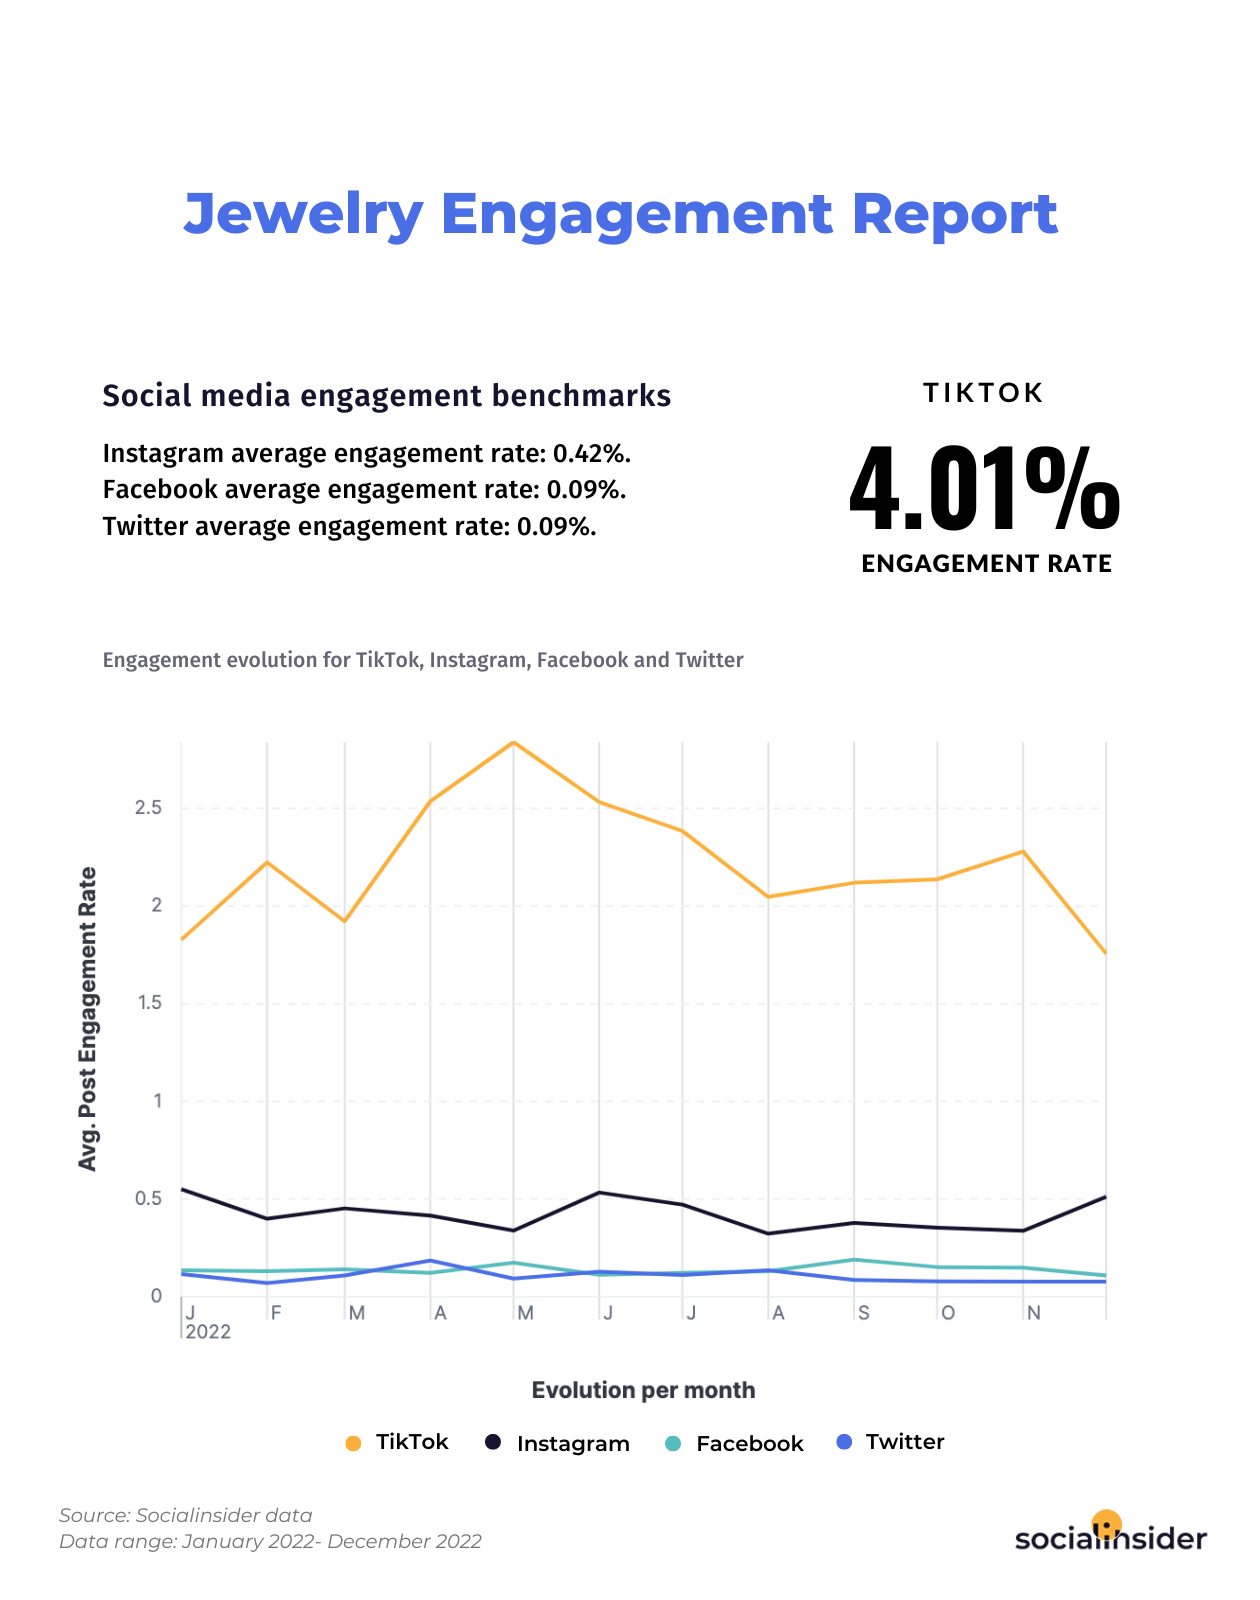 Here you can see how the jewelry industry ranks in terms of social media benchmarks for 2023.